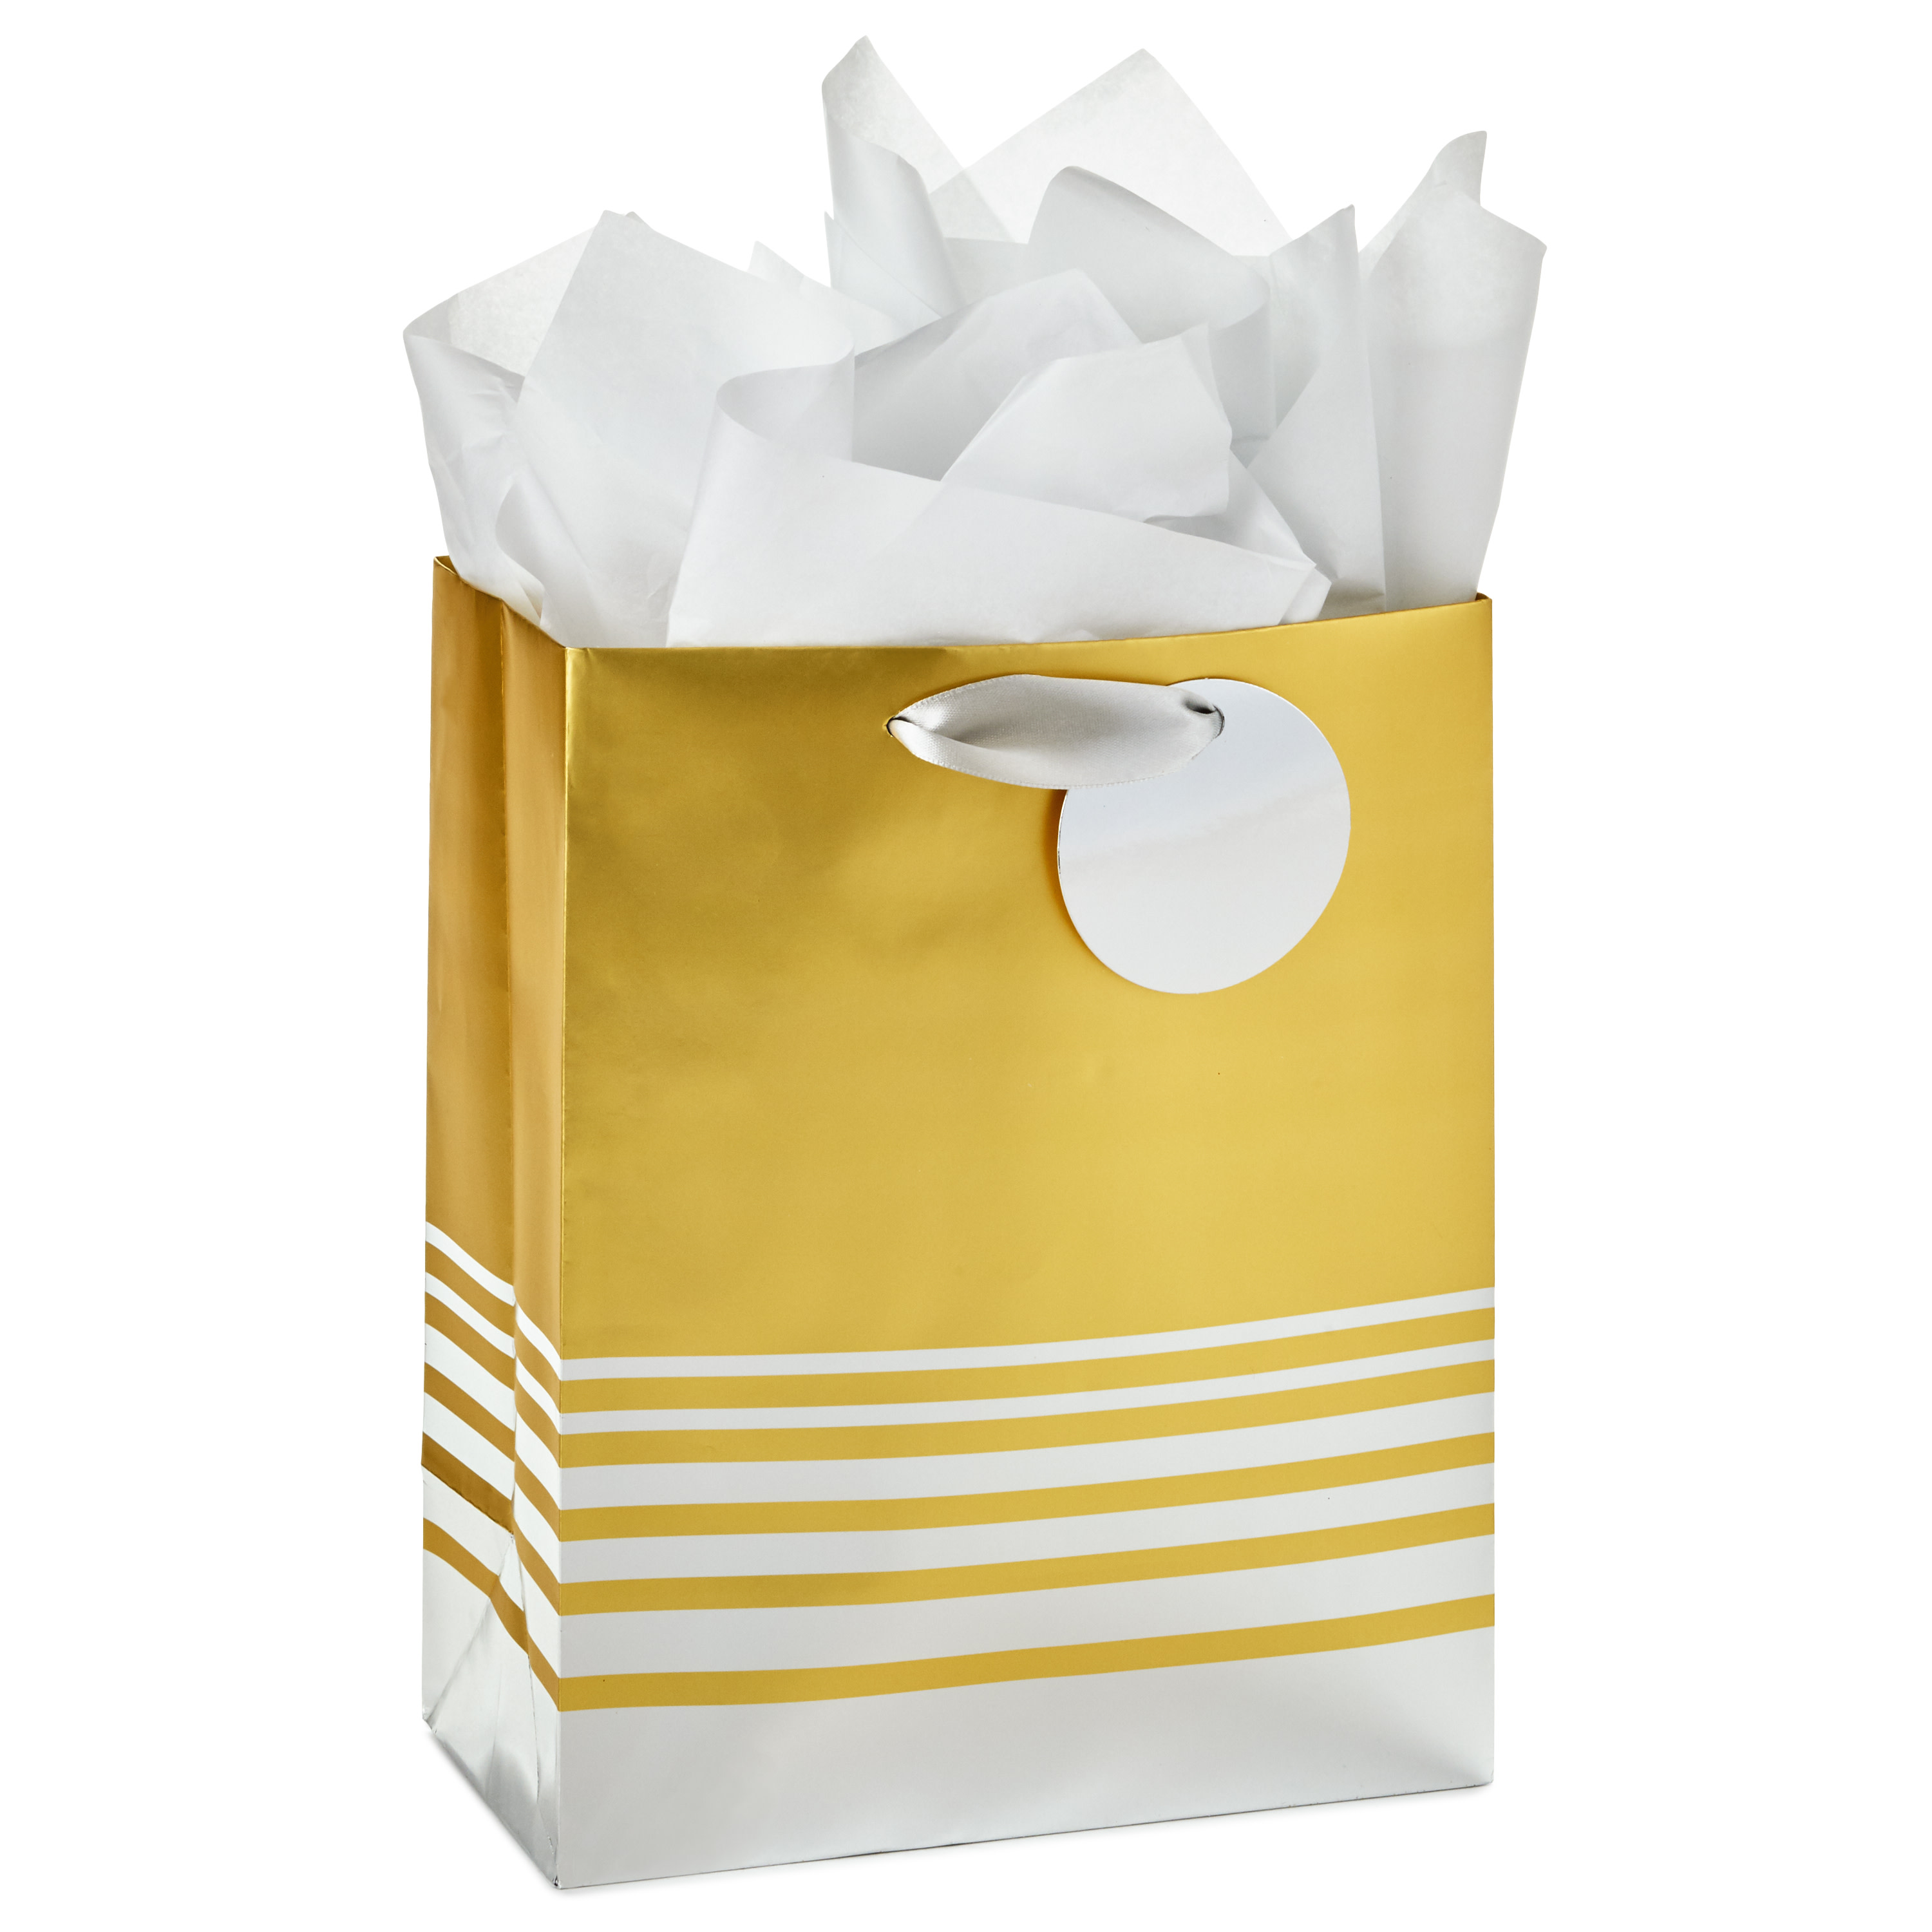 Hallmark 9" Medium Gift Bag with Tissue Paper (Silver and Gold Foil) for Christmas, Hanukkah, Holidays, Birthdays, Bridal Showers, Weddings, All Occasion - image 1 of 5